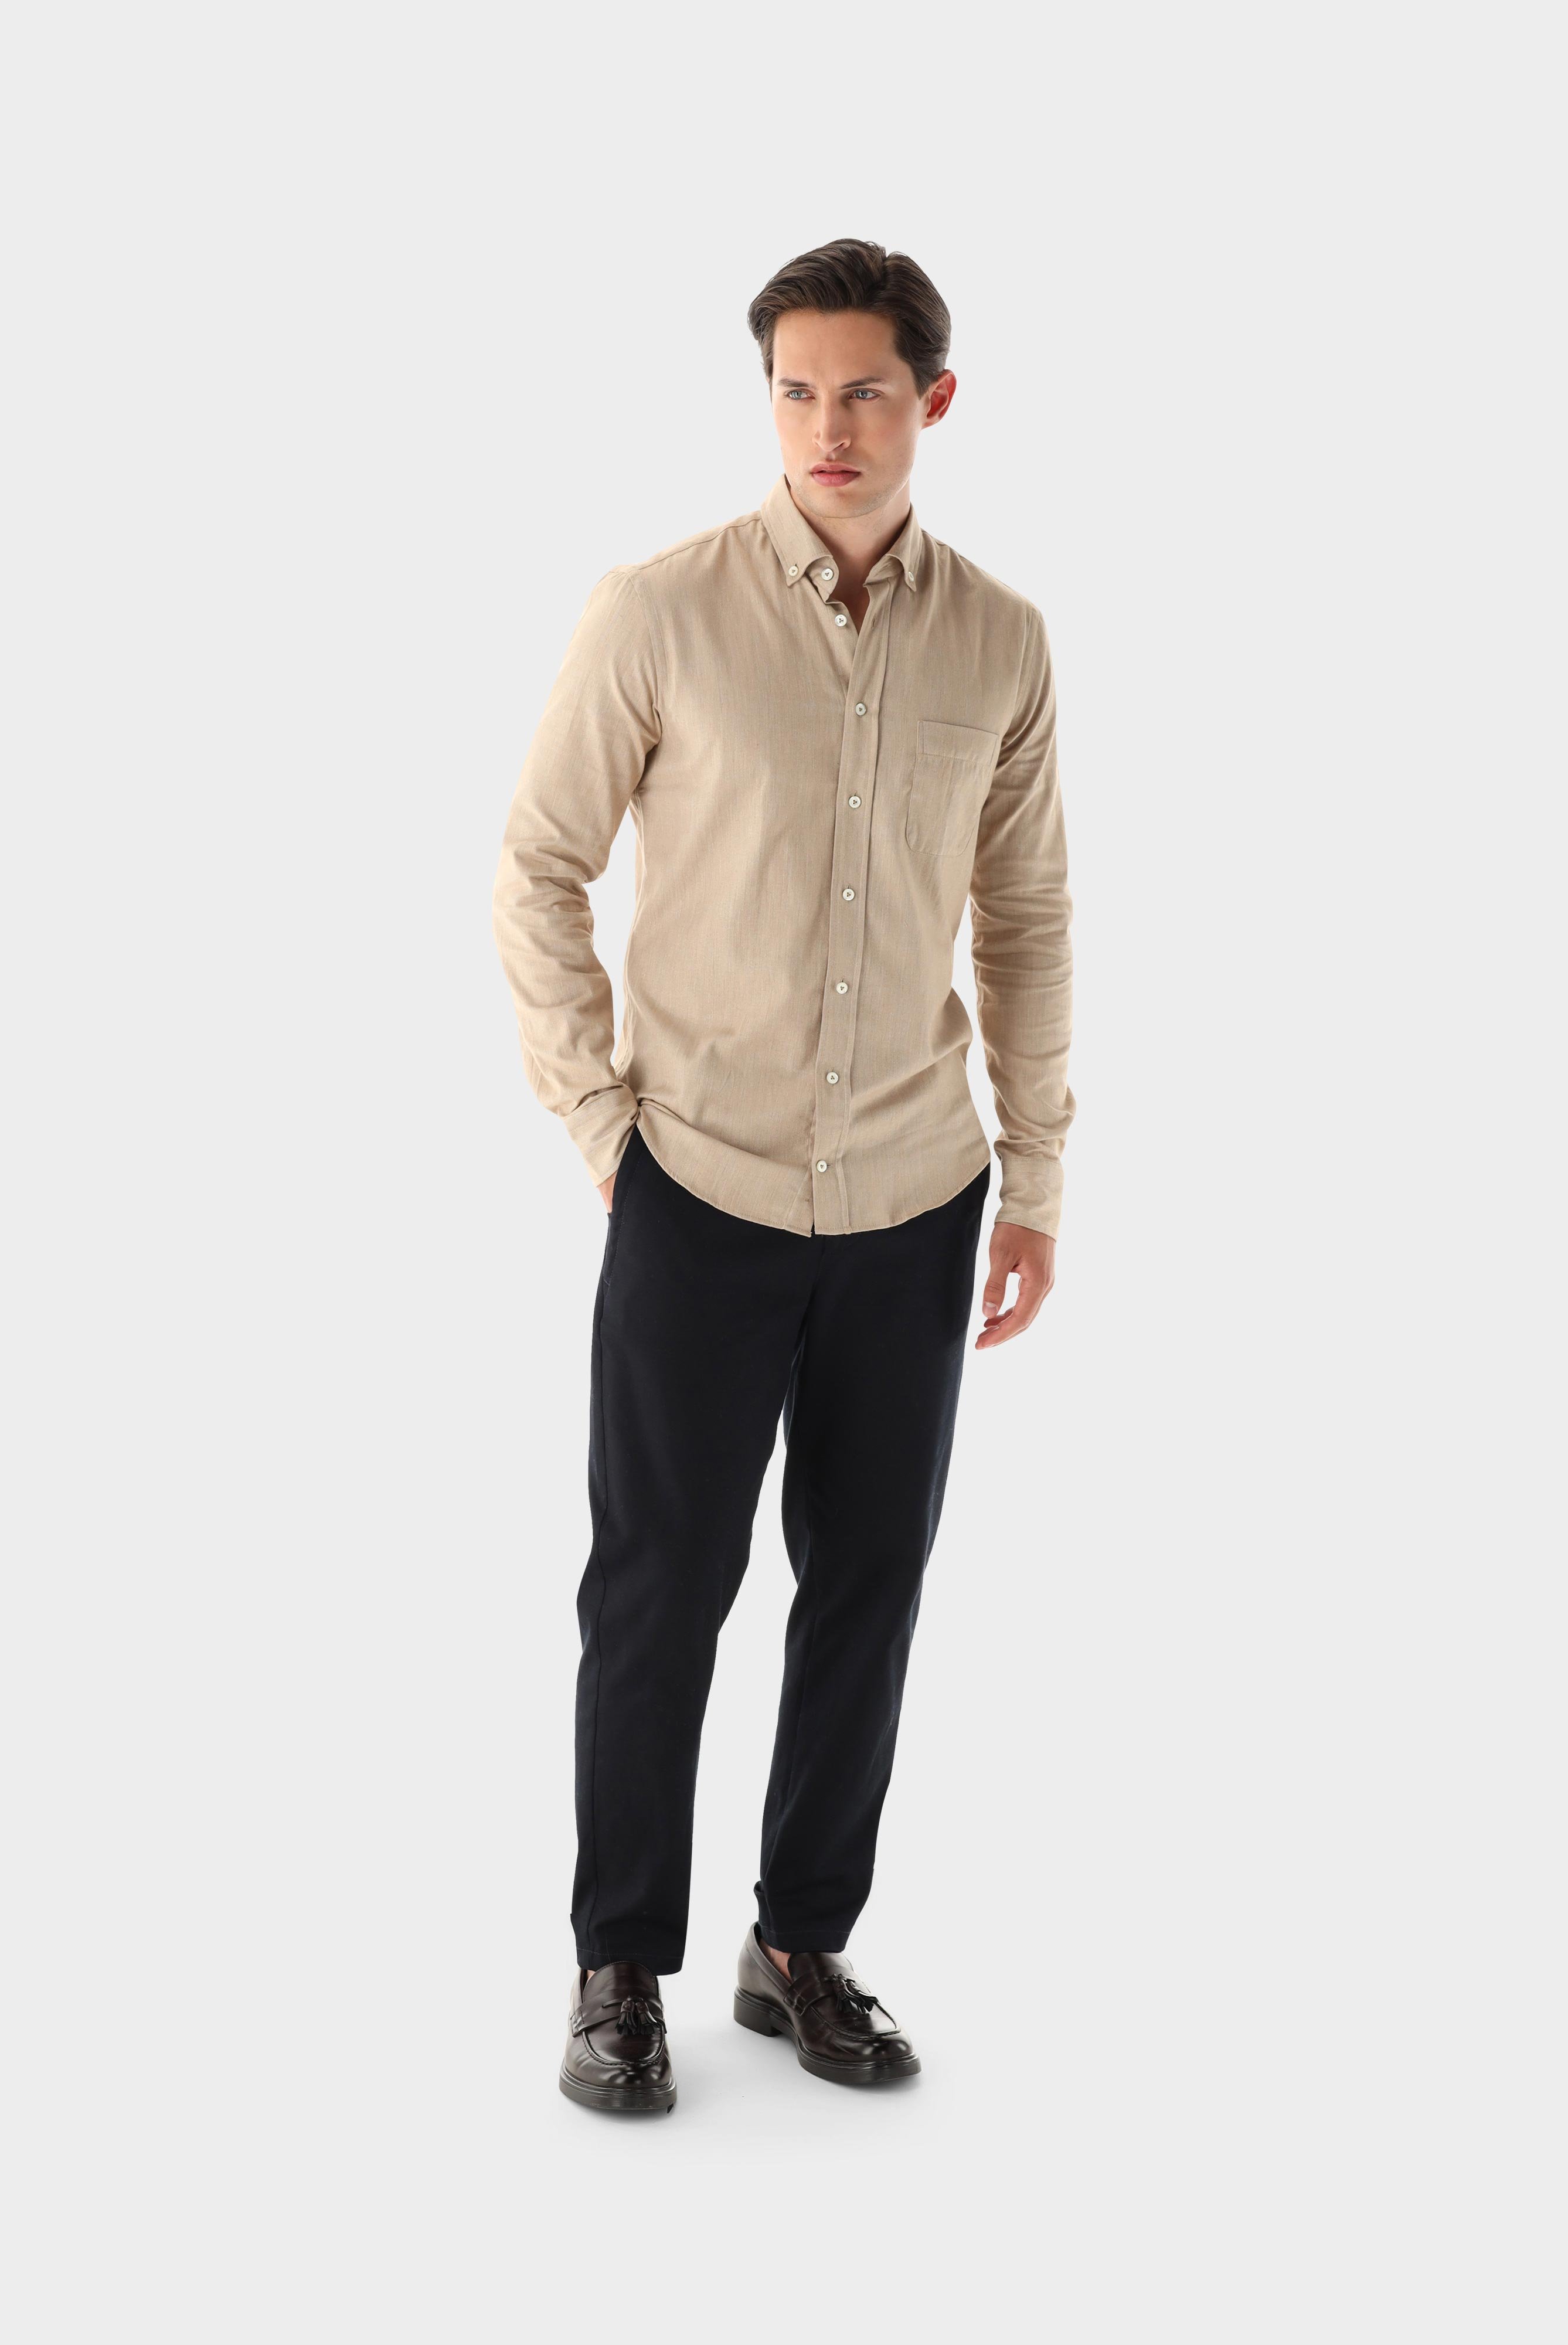 Casual Hemden+Button-Down Flanellhemd Tailor Fit+20.2013.9V.155045.130.43